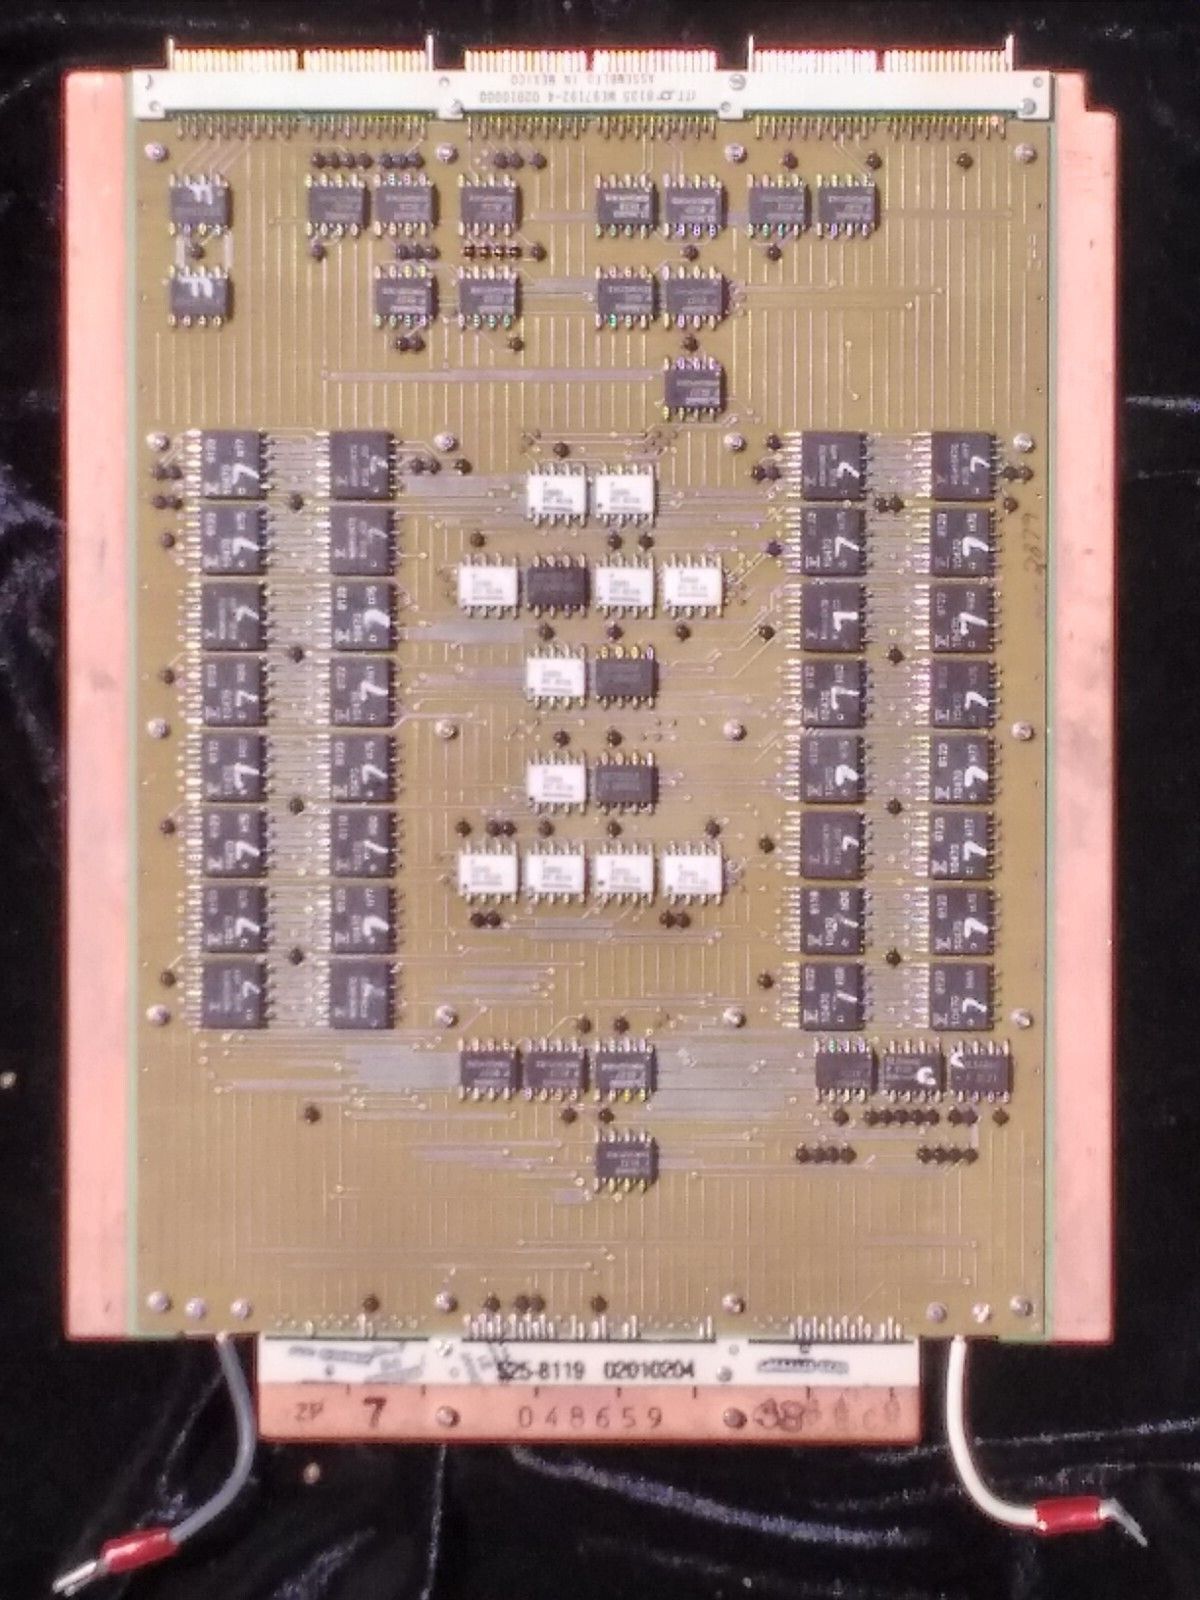 Cray-1 SuperComputer Board Memory. The connections are a Pole, not a screwed one